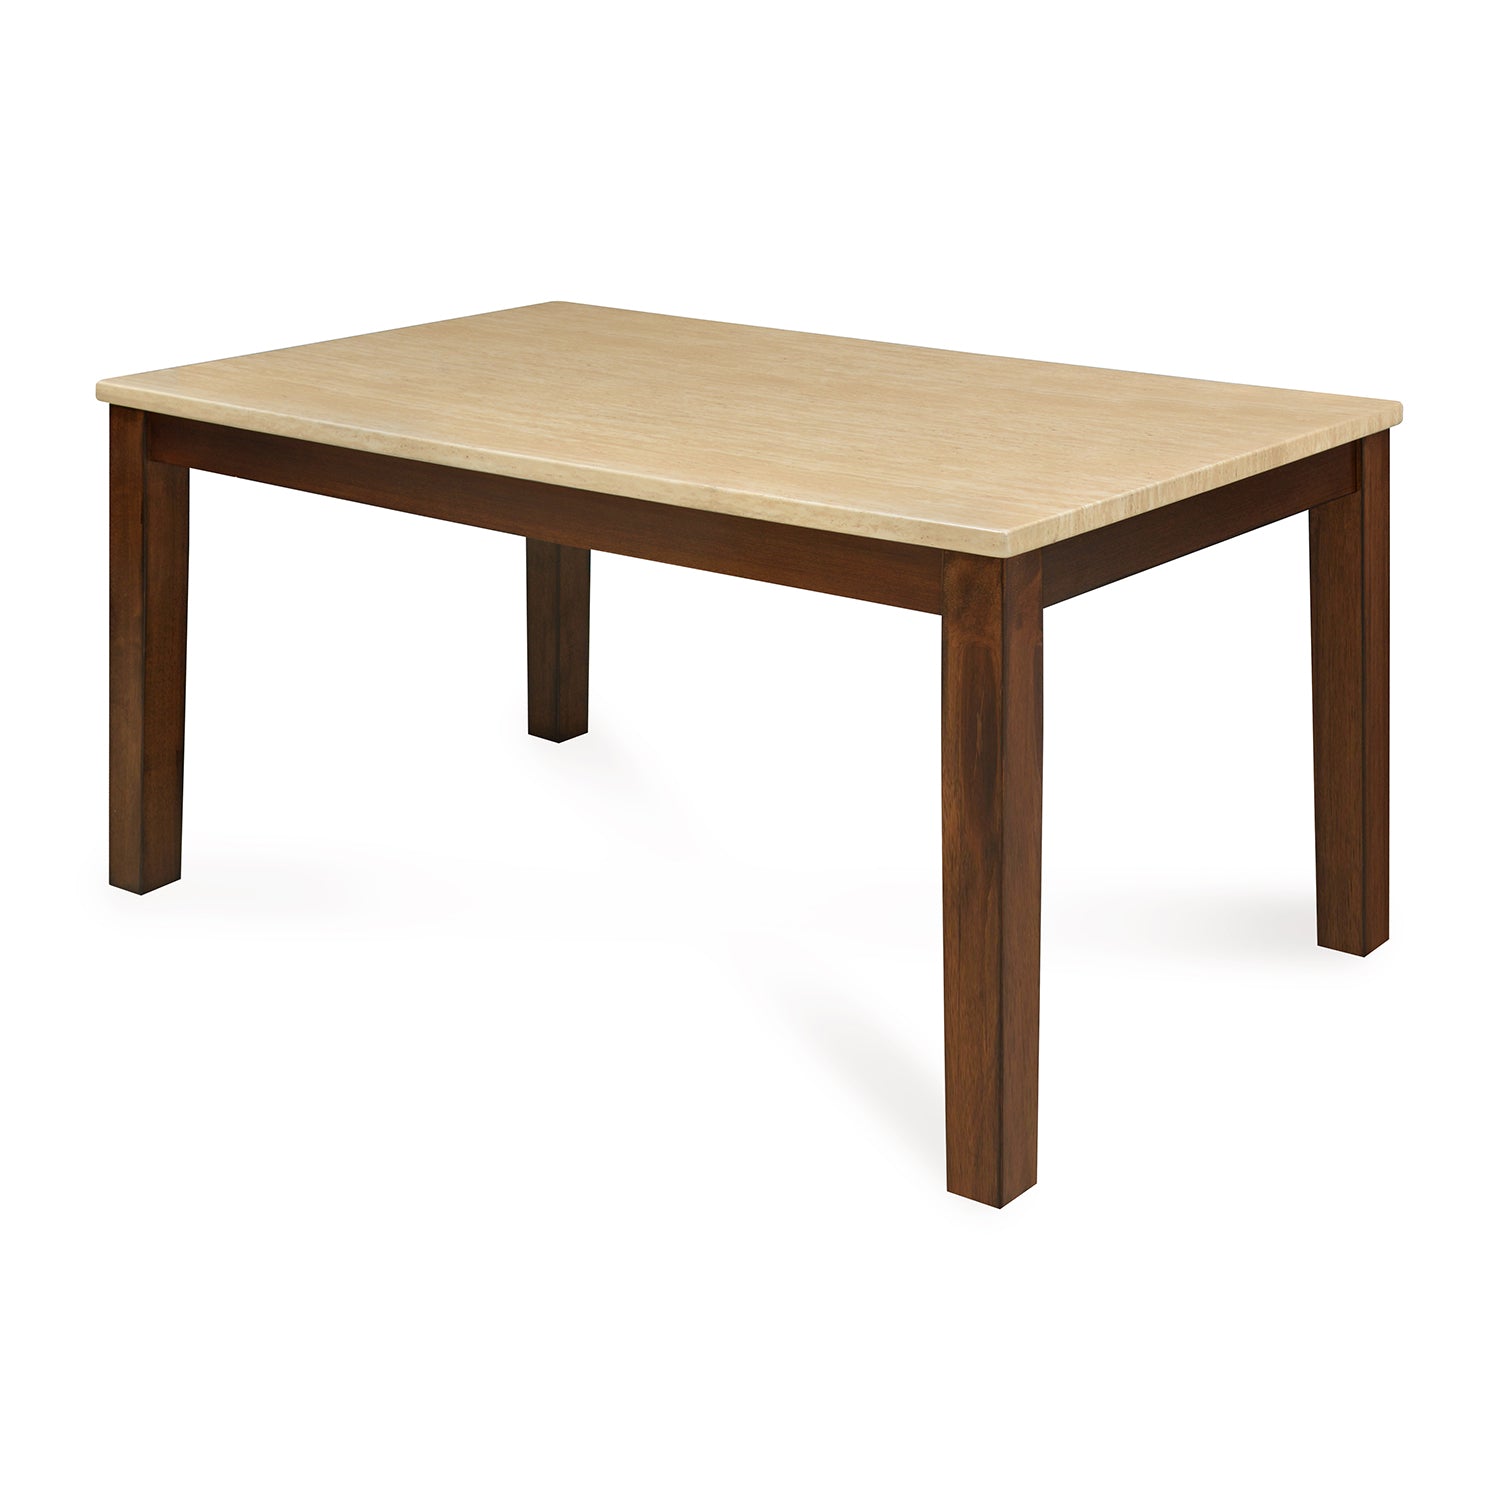 Arnold Marble 6 Seater Dining Table (Beige)